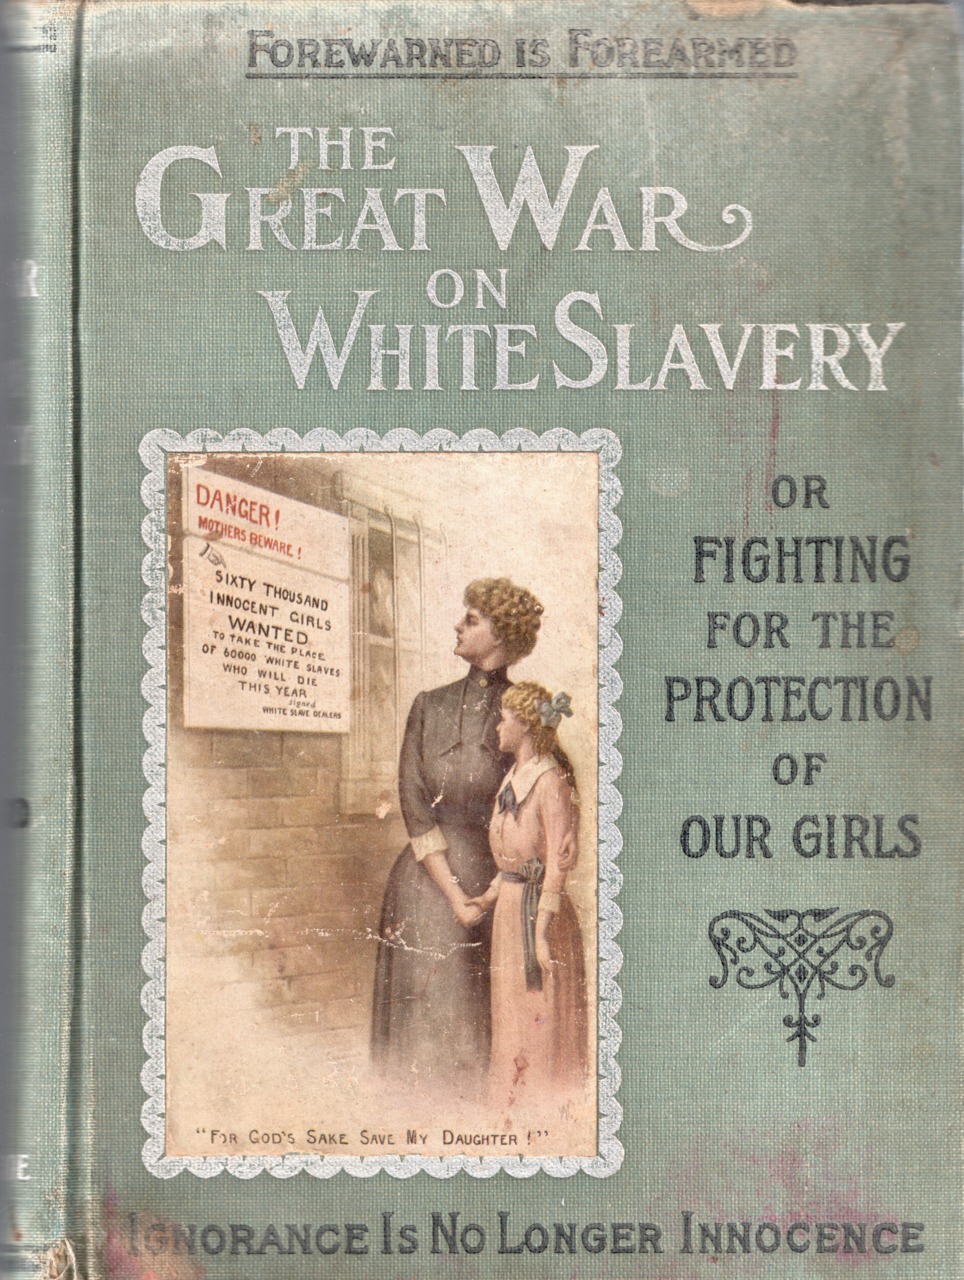 "The Great War on White Slavery," by Clifford Roe